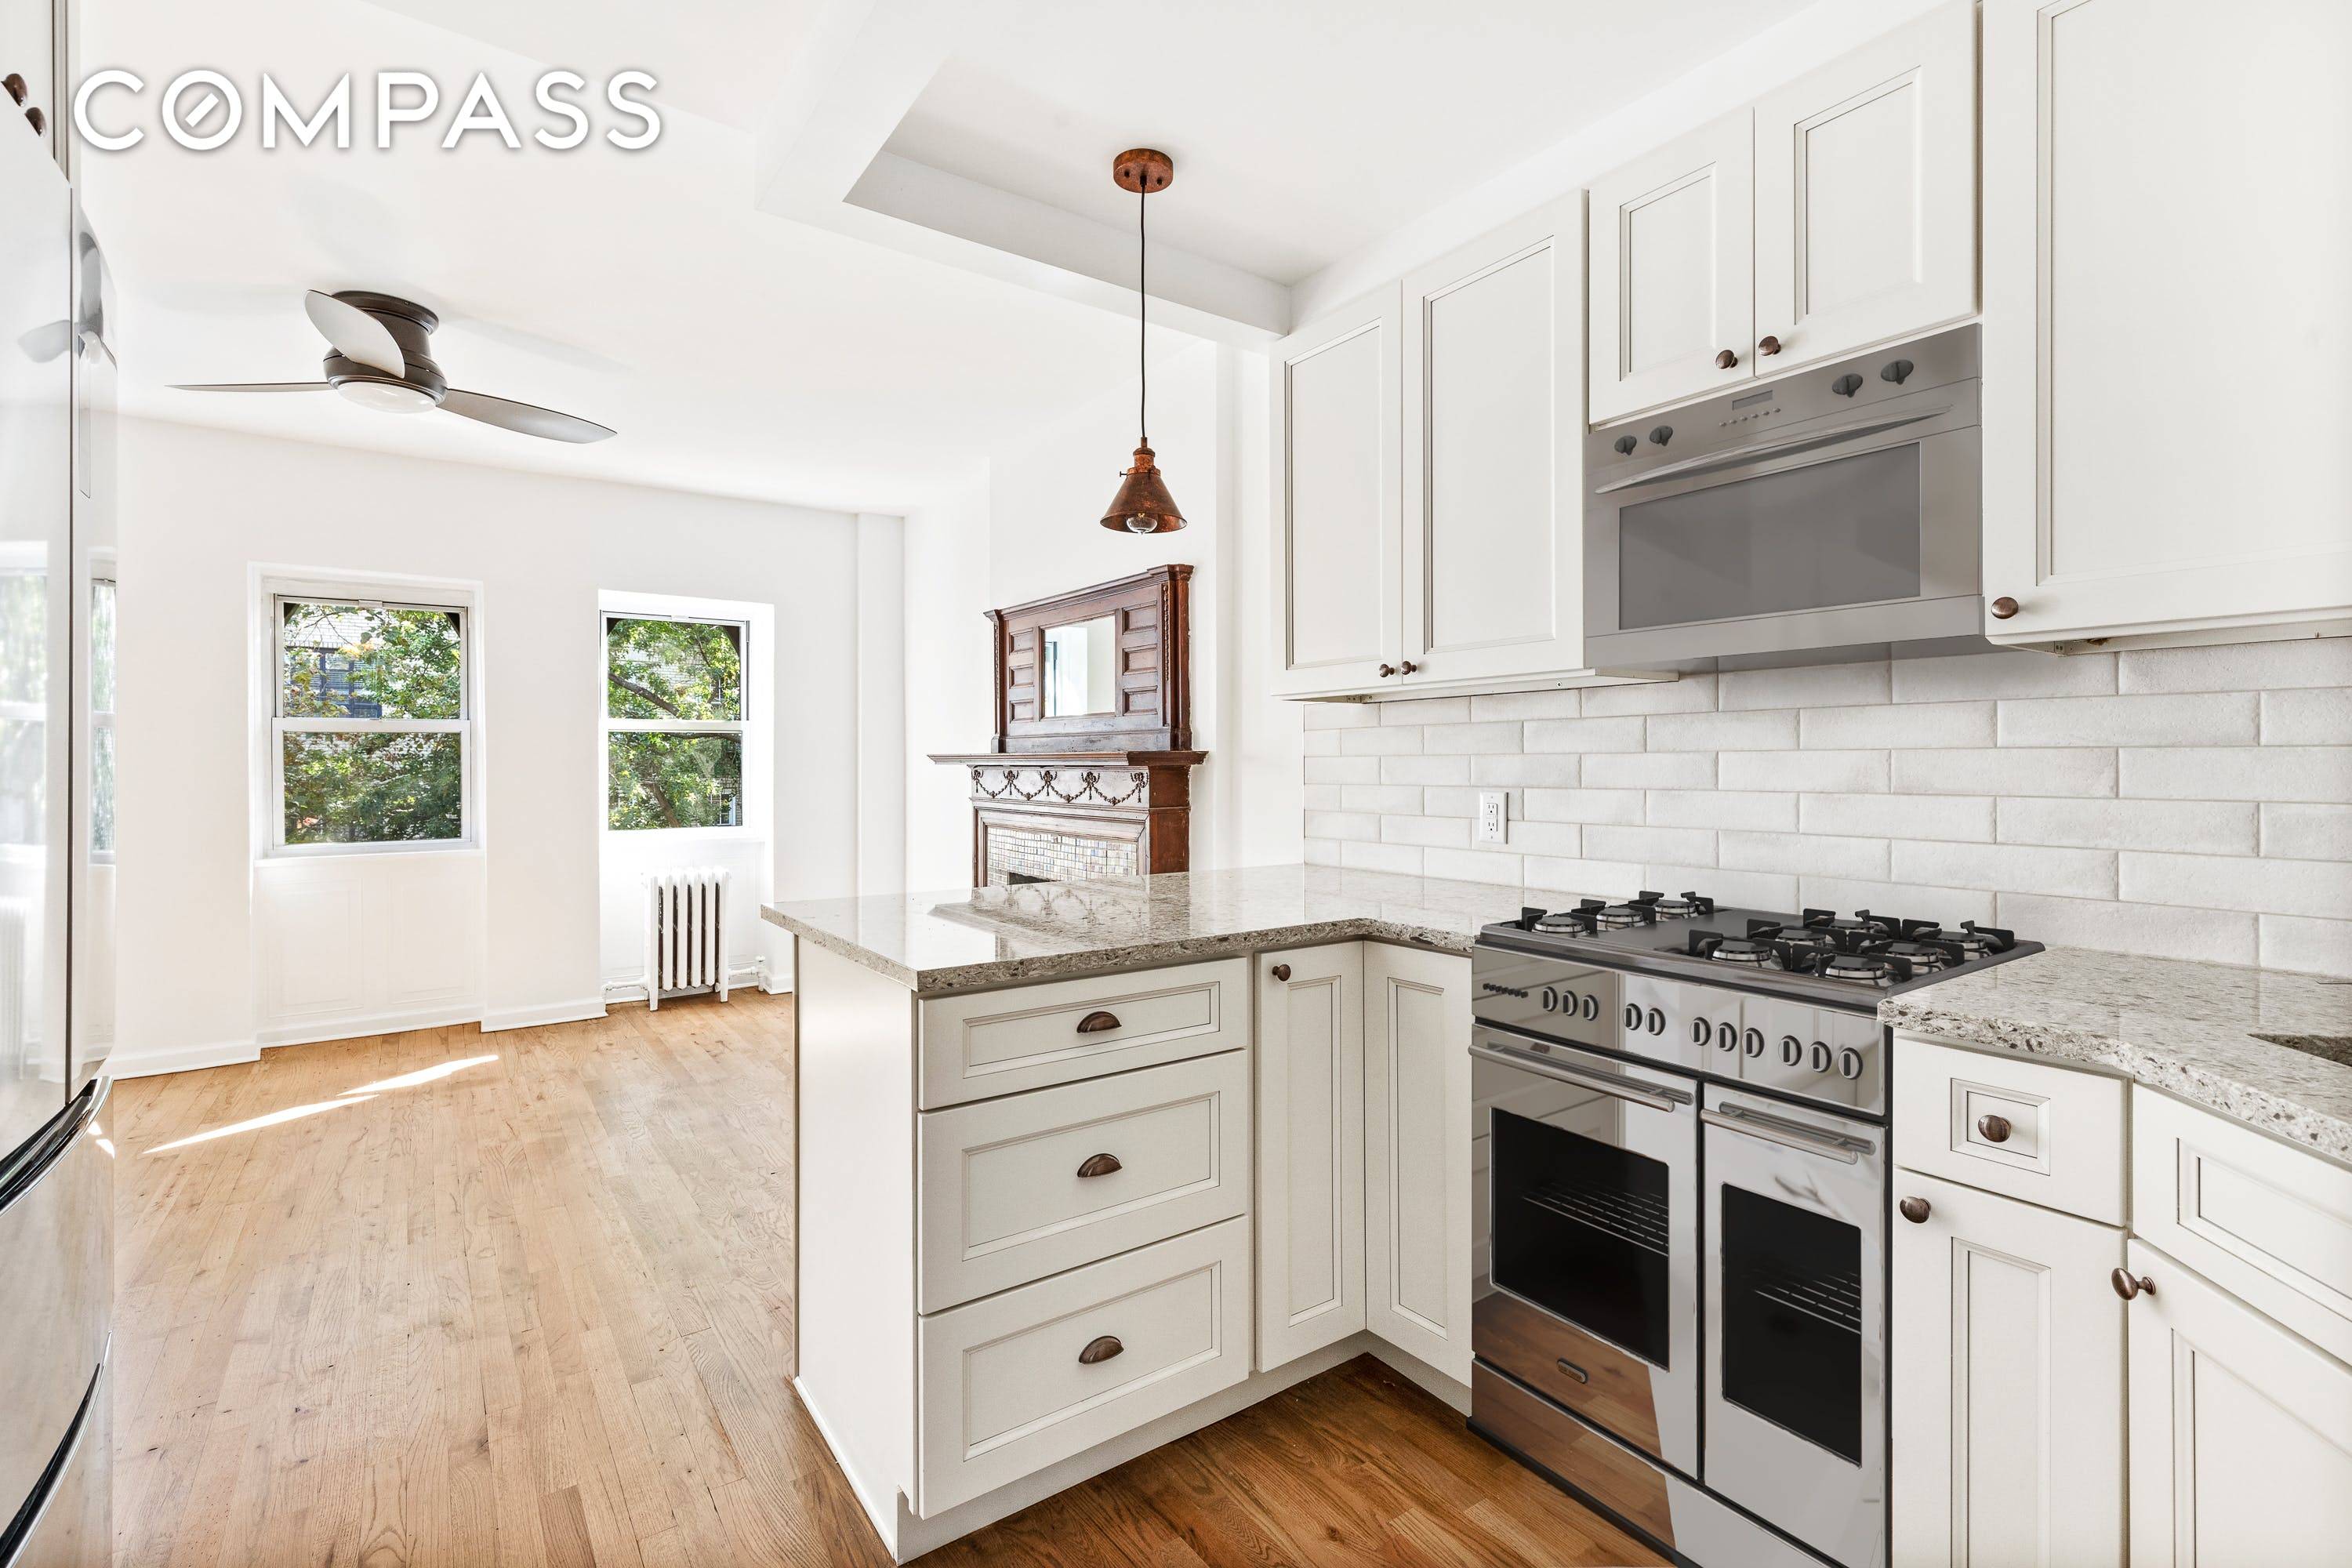 NEWLY RENOVATED upper duplex on quiet, tree lined Fiske place in prime Park Slope !